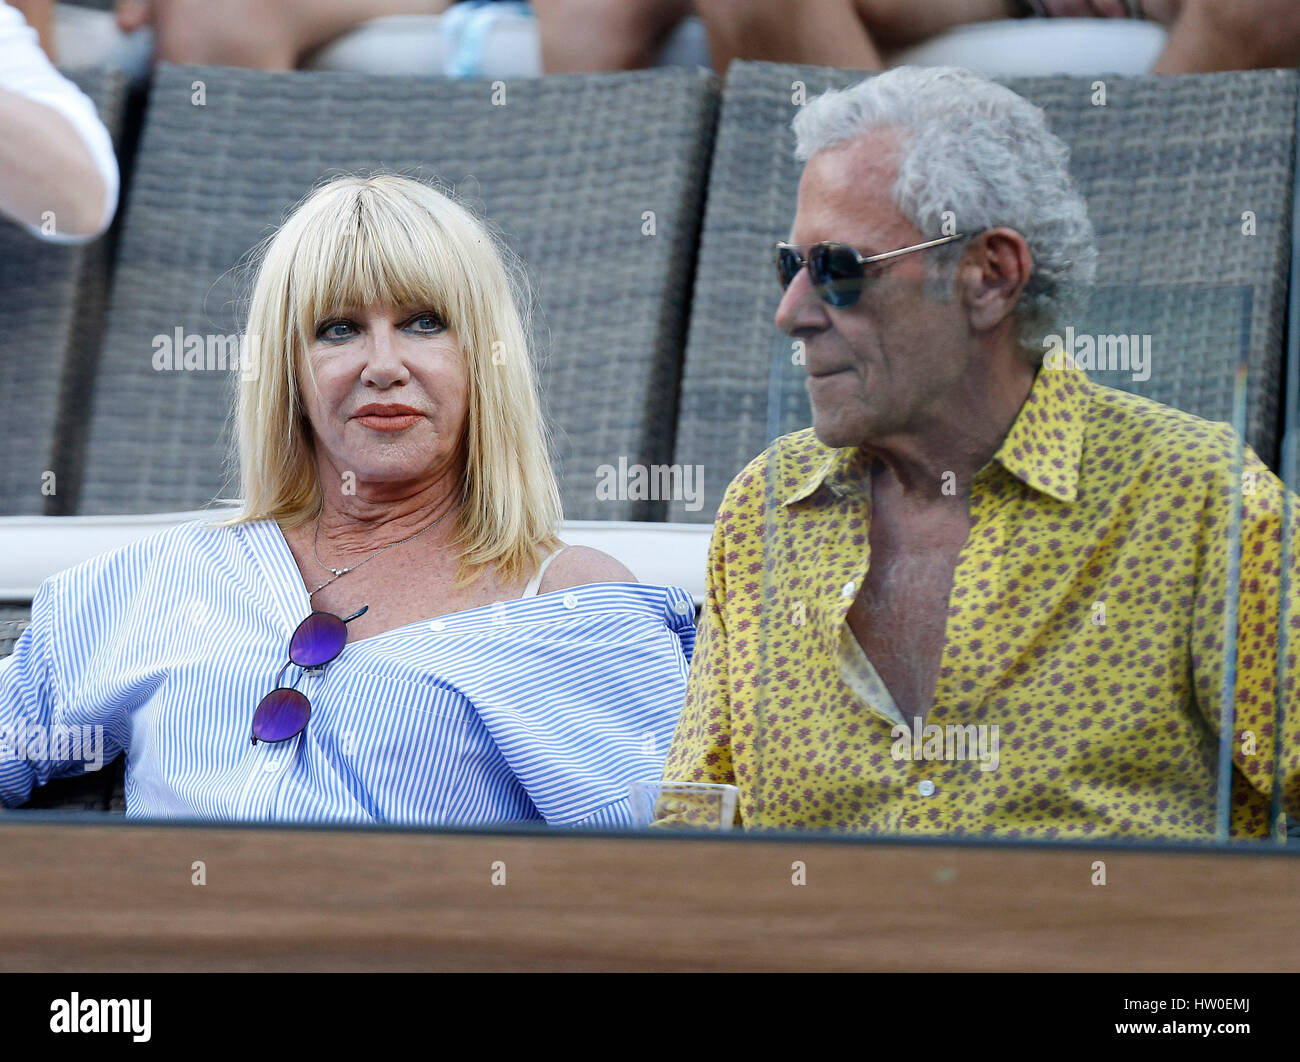 Indian Wells, California, USA. 15th March, 2017. Actress Suzanne Somers watches the tennis match between Rafael Nadal of Spain and Roger Federer of Switzerland during the 2017 BNP Paribas Open at Indian Wells Tennis Garden in Indian Wells, California. Charles Baus/CSM Credit: Cal Sport Media/Alamy Live News Stock Photo